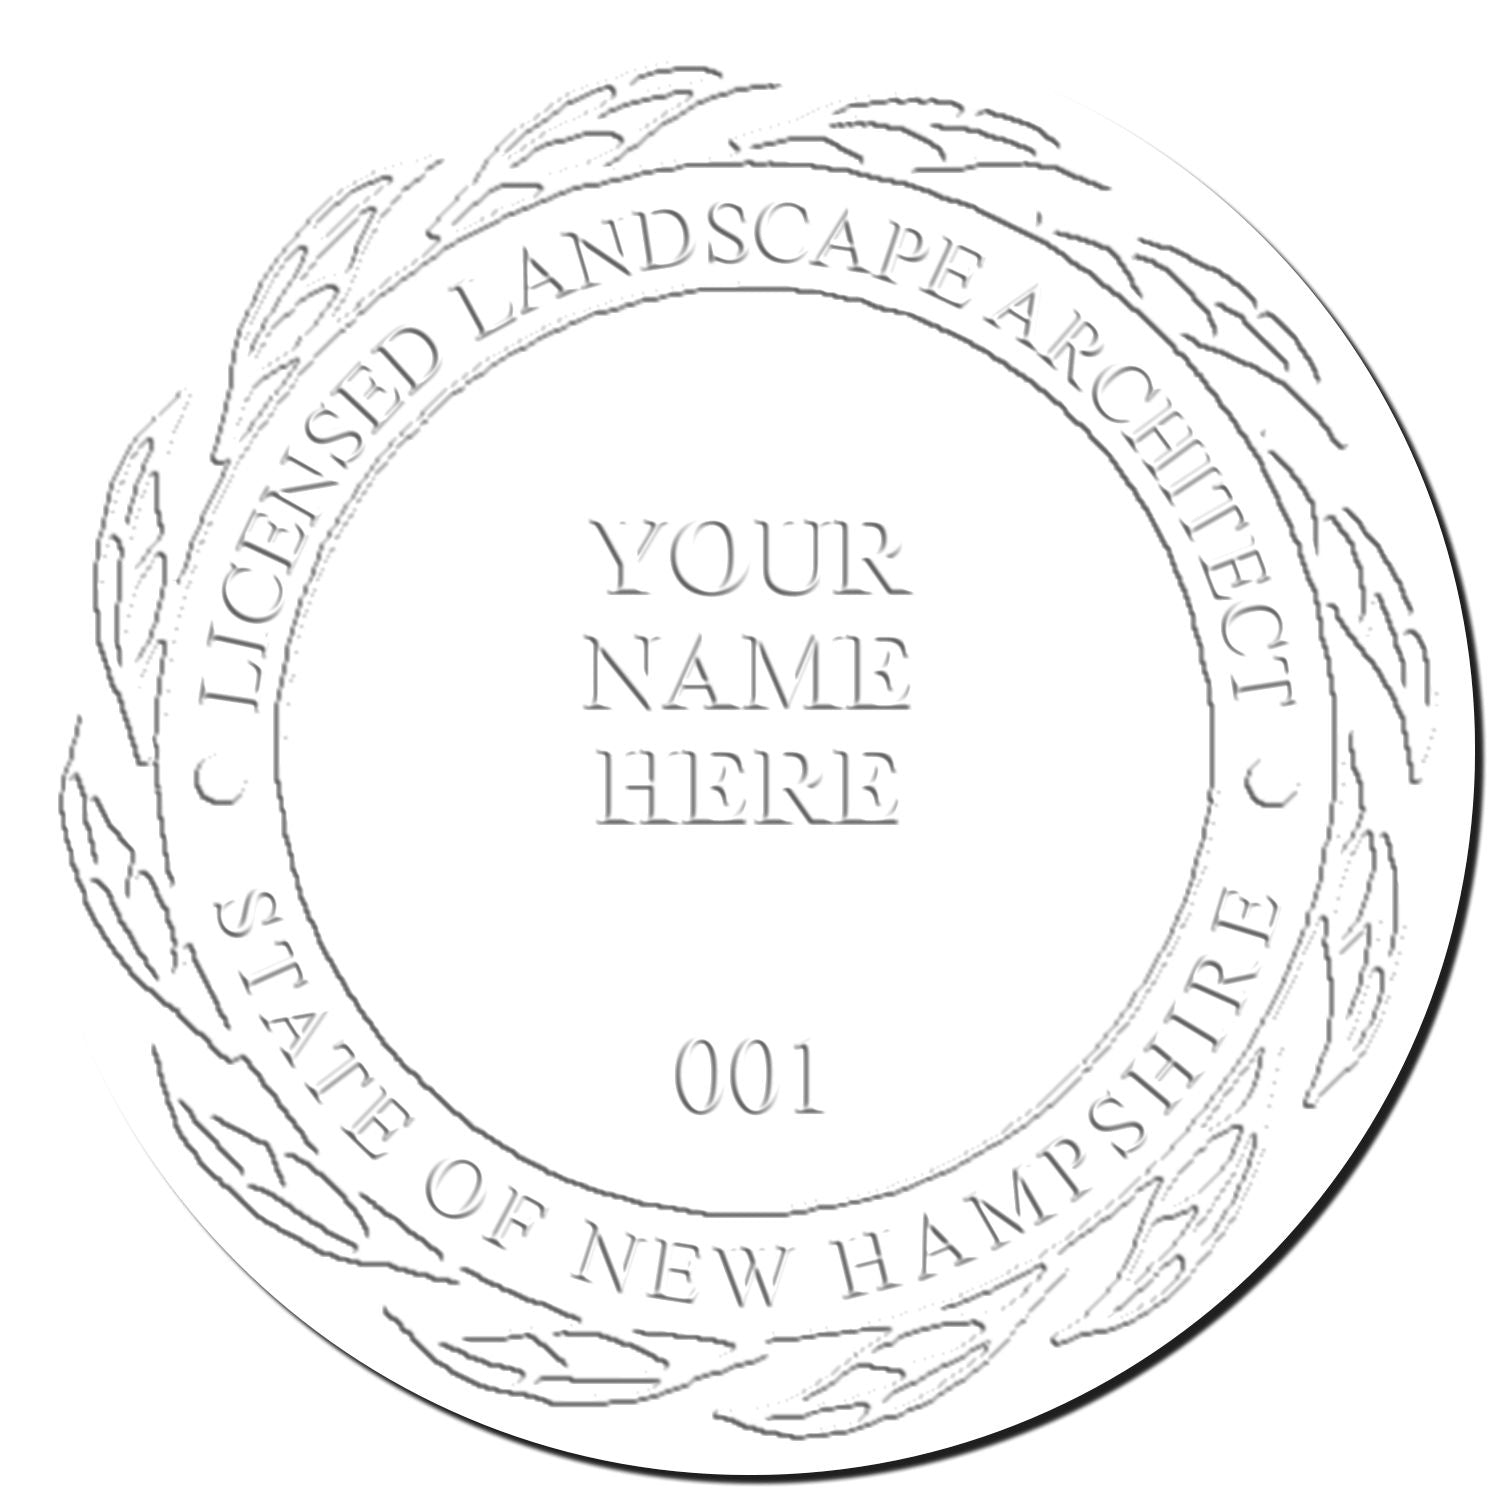 This paper is stamped with a sample imprint of the New Hampshire Long Reach Landscape Architect Embossing Stamp, signifying its quality and reliability.